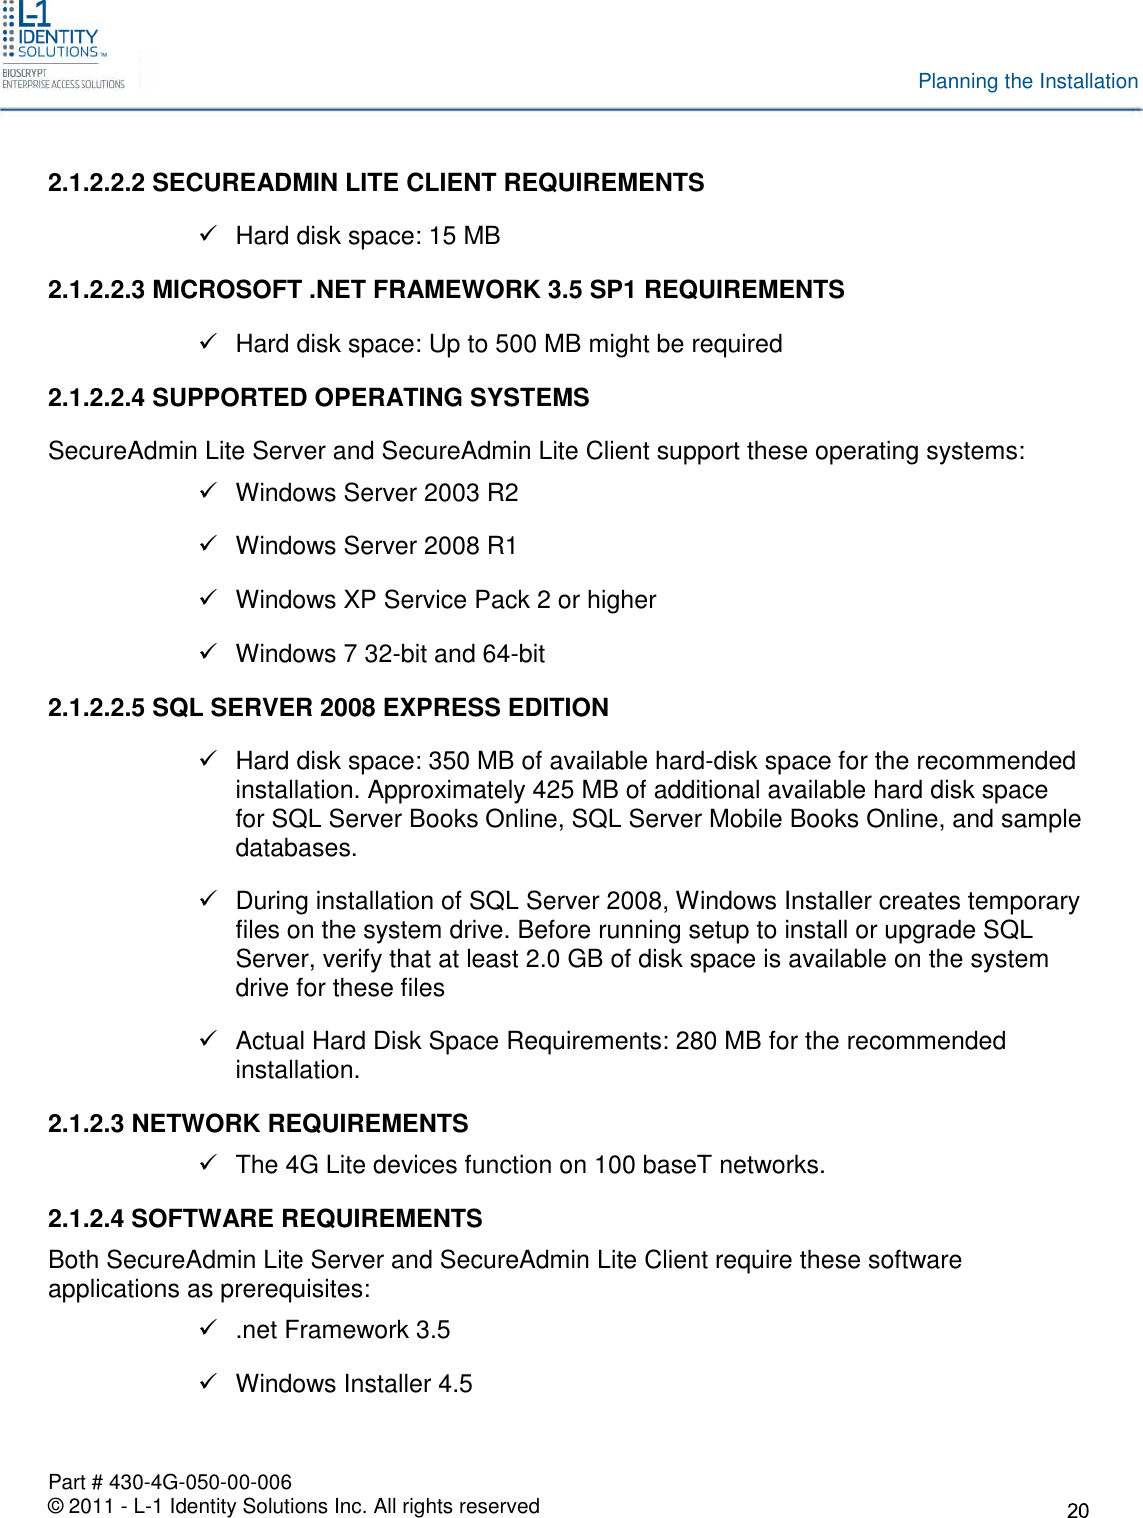 Part # 430-4G-050-00-006© 2011 - L-1 Identity Solutions Inc. All rights reservedPlanning the Installation2.1.2.2.2 SECUREADMIN LITE CLIENT REQUIREMENTSHard disk space: 15 MB2.1.2.2.3 MICROSOFT .NET FRAMEWORK 3.5 SP1 REQUIREMENTSHard disk space: Up to 500 MB might be required2.1.2.2.4 SUPPORTED OPERATING SYSTEMSSecureAdmin Lite Server and SecureAdmin Lite Client support these operating systems:Windows Server 2003 R2Windows Server 2008 R1Windows XP Service Pack 2 or higherWindows 7 32-bit and 64-bit2.1.2.2.5 SQL SERVER 2008 EXPRESS EDITIONHard disk space: 350 MB of available hard-disk space for the recommendedinstallation. Approximately 425 MB of additional available hard disk spacefor SQL Server Books Online, SQL Server Mobile Books Online, and sampledatabases.During installation of SQL Server 2008, Windows Installer creates temporaryfiles on the system drive. Before running setup to install or upgrade SQLServer, verify that at least 2.0 GB of disk space is available on the systemdrive for these filesActual Hard Disk Space Requirements: 280 MB for the recommendedinstallation.2.1.2.3 NETWORK REQUIREMENTSThe 4G Lite devices function on 100 baseT networks.2.1.2.4 SOFTWARE REQUIREMENTSBoth SecureAdmin Lite Server and SecureAdmin Lite Client require these softwareapplications as prerequisites:.net Framework 3.5Windows Installer 4.5